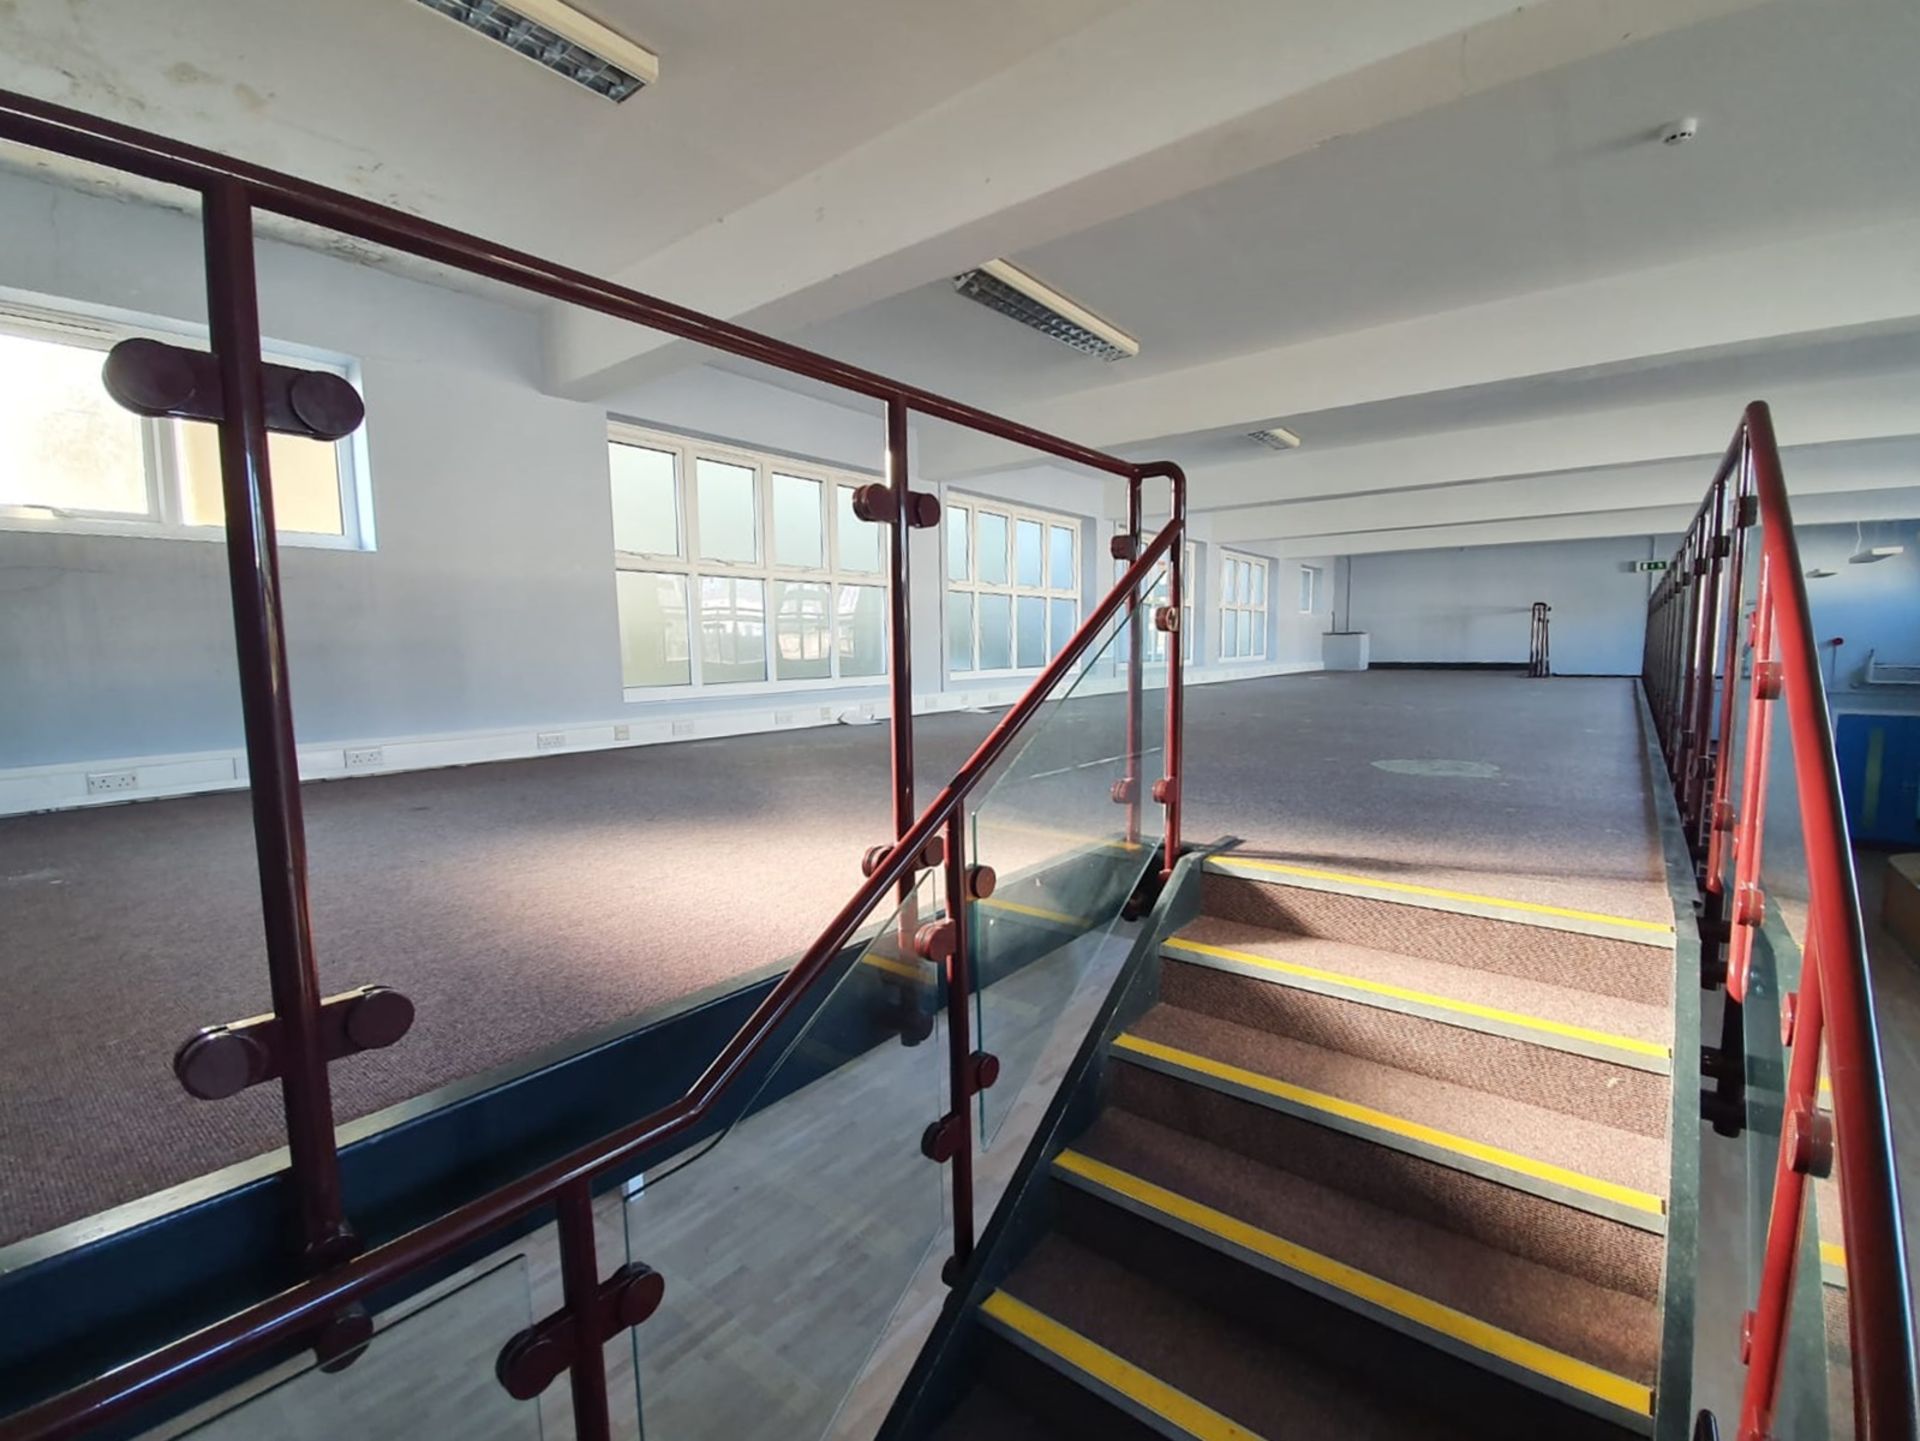 1 x Mezzanine Floor With Two Sets of Floating Stairs and Glazed Safety Panels With Hand Rails - From - Image 18 of 18